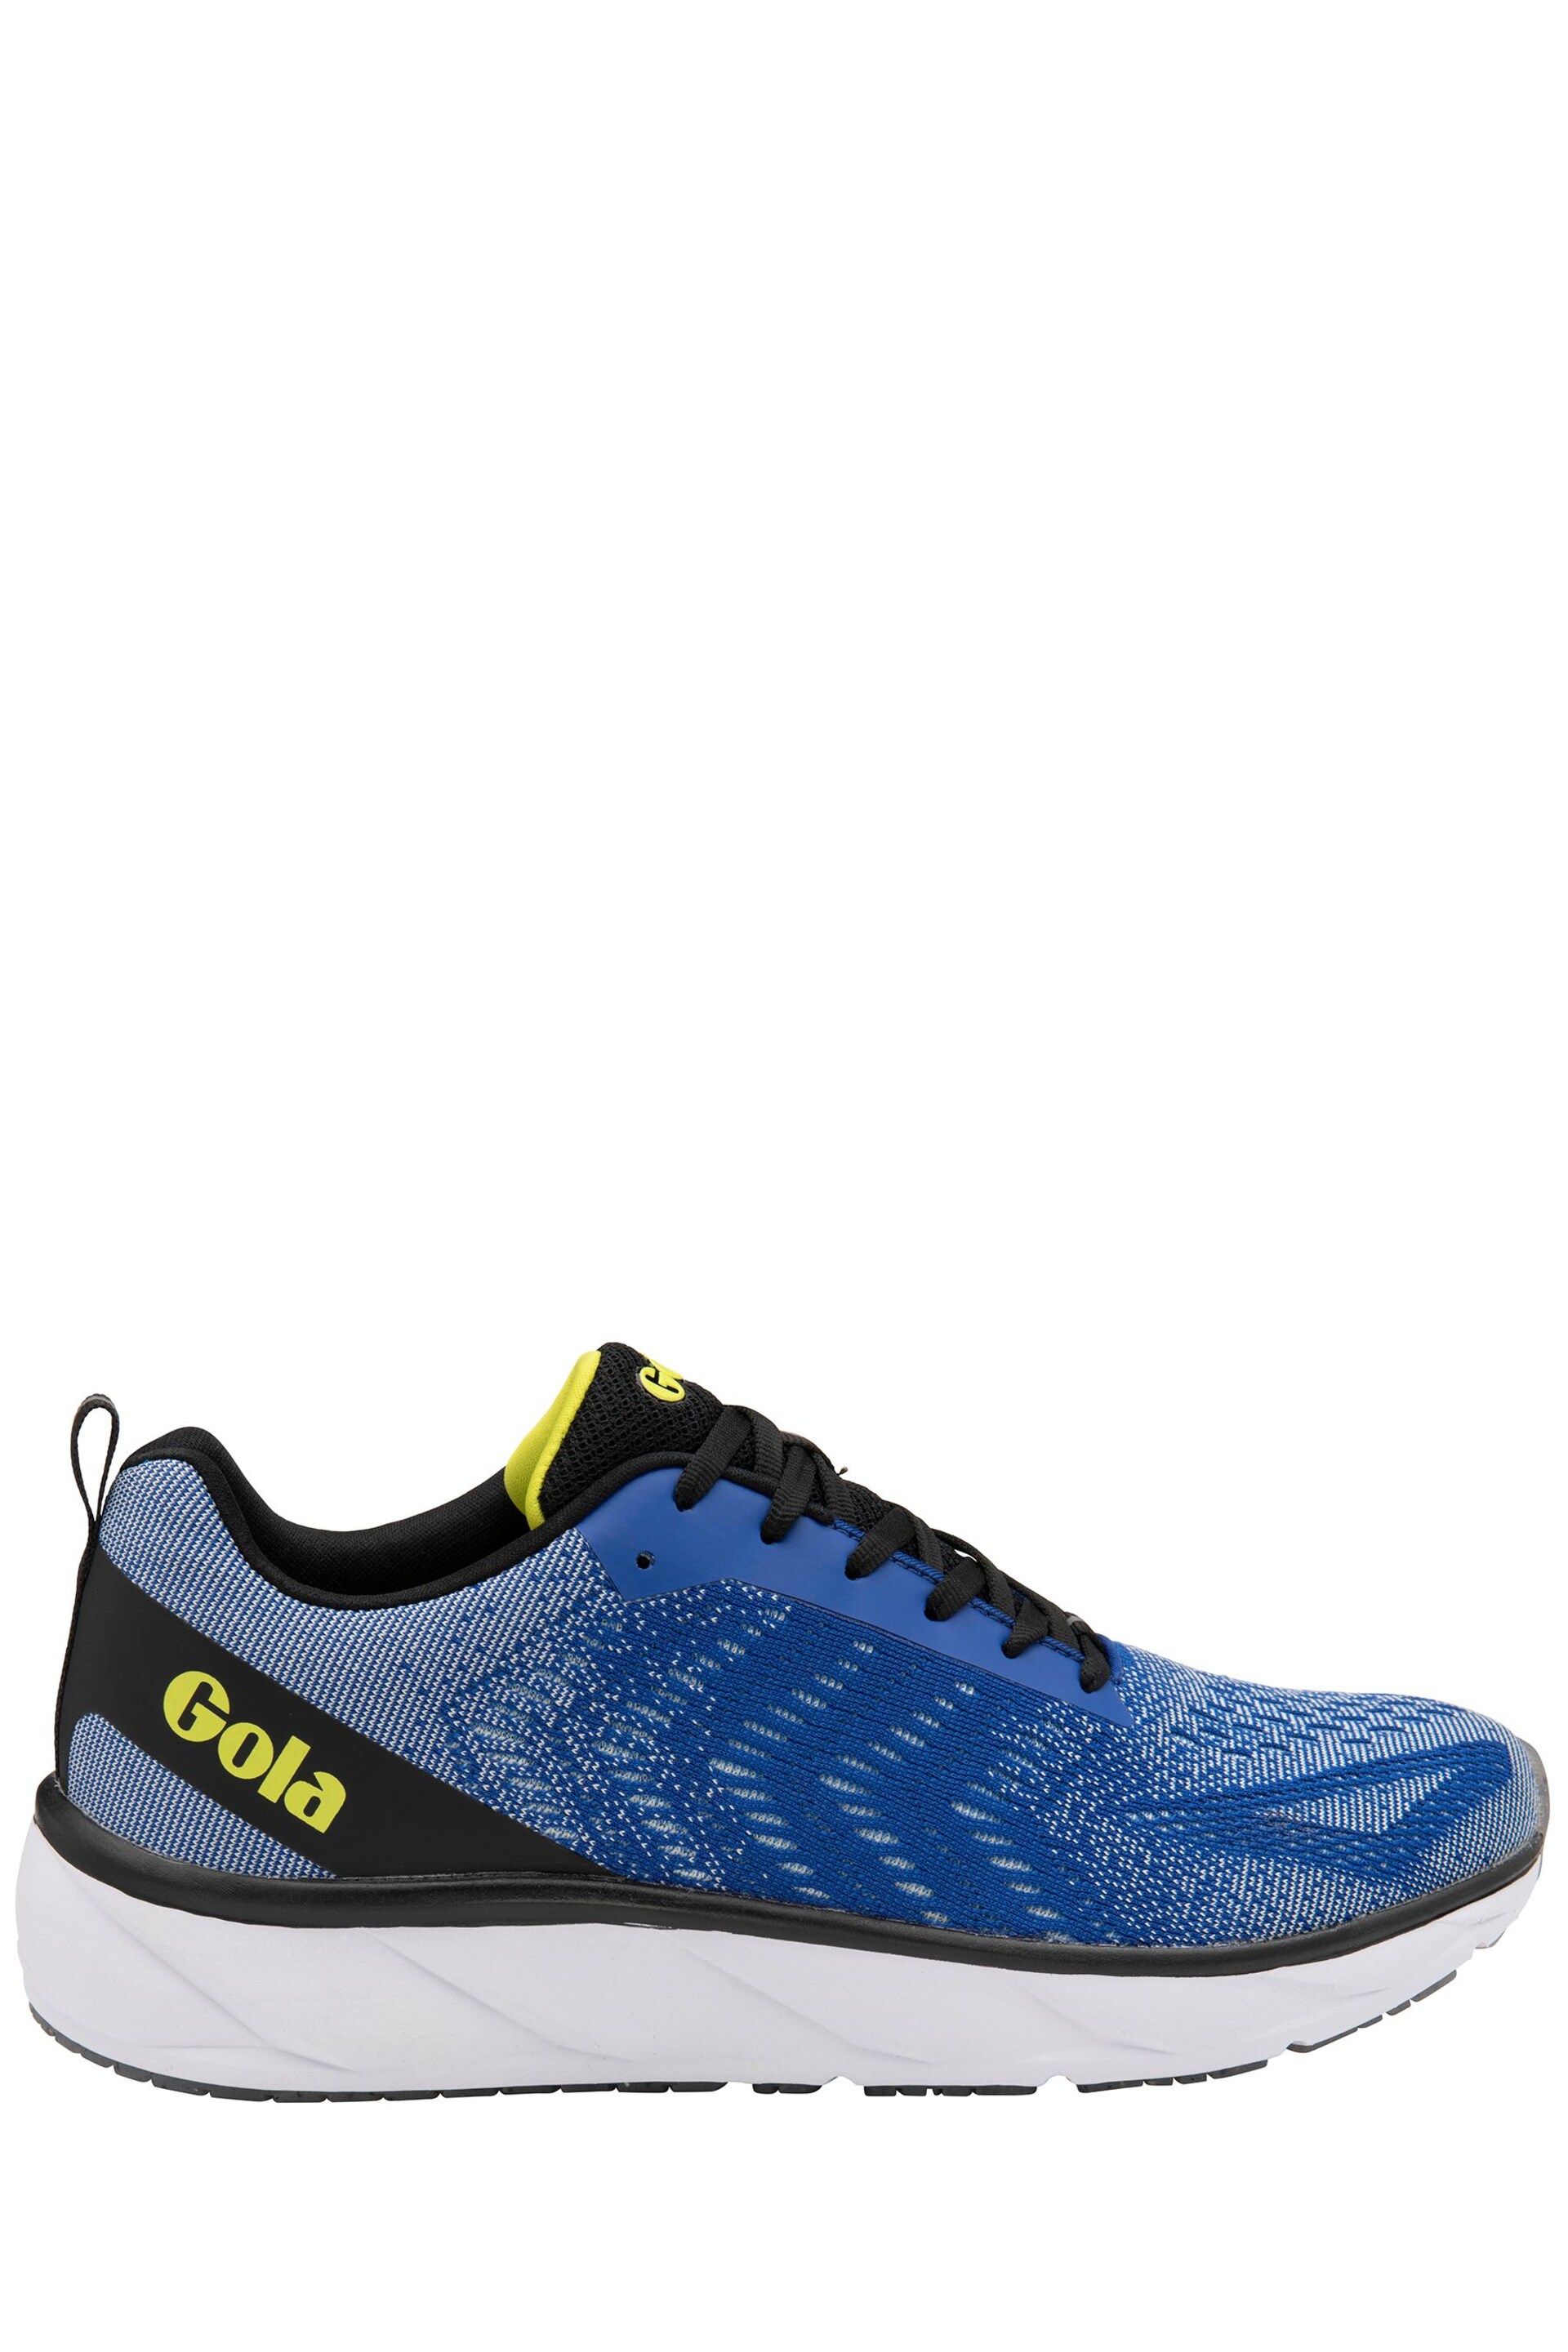 Gola Blue Ultra Speed 2 Mesh Lace-Up Mens Running Trainers - Image 1 of 1